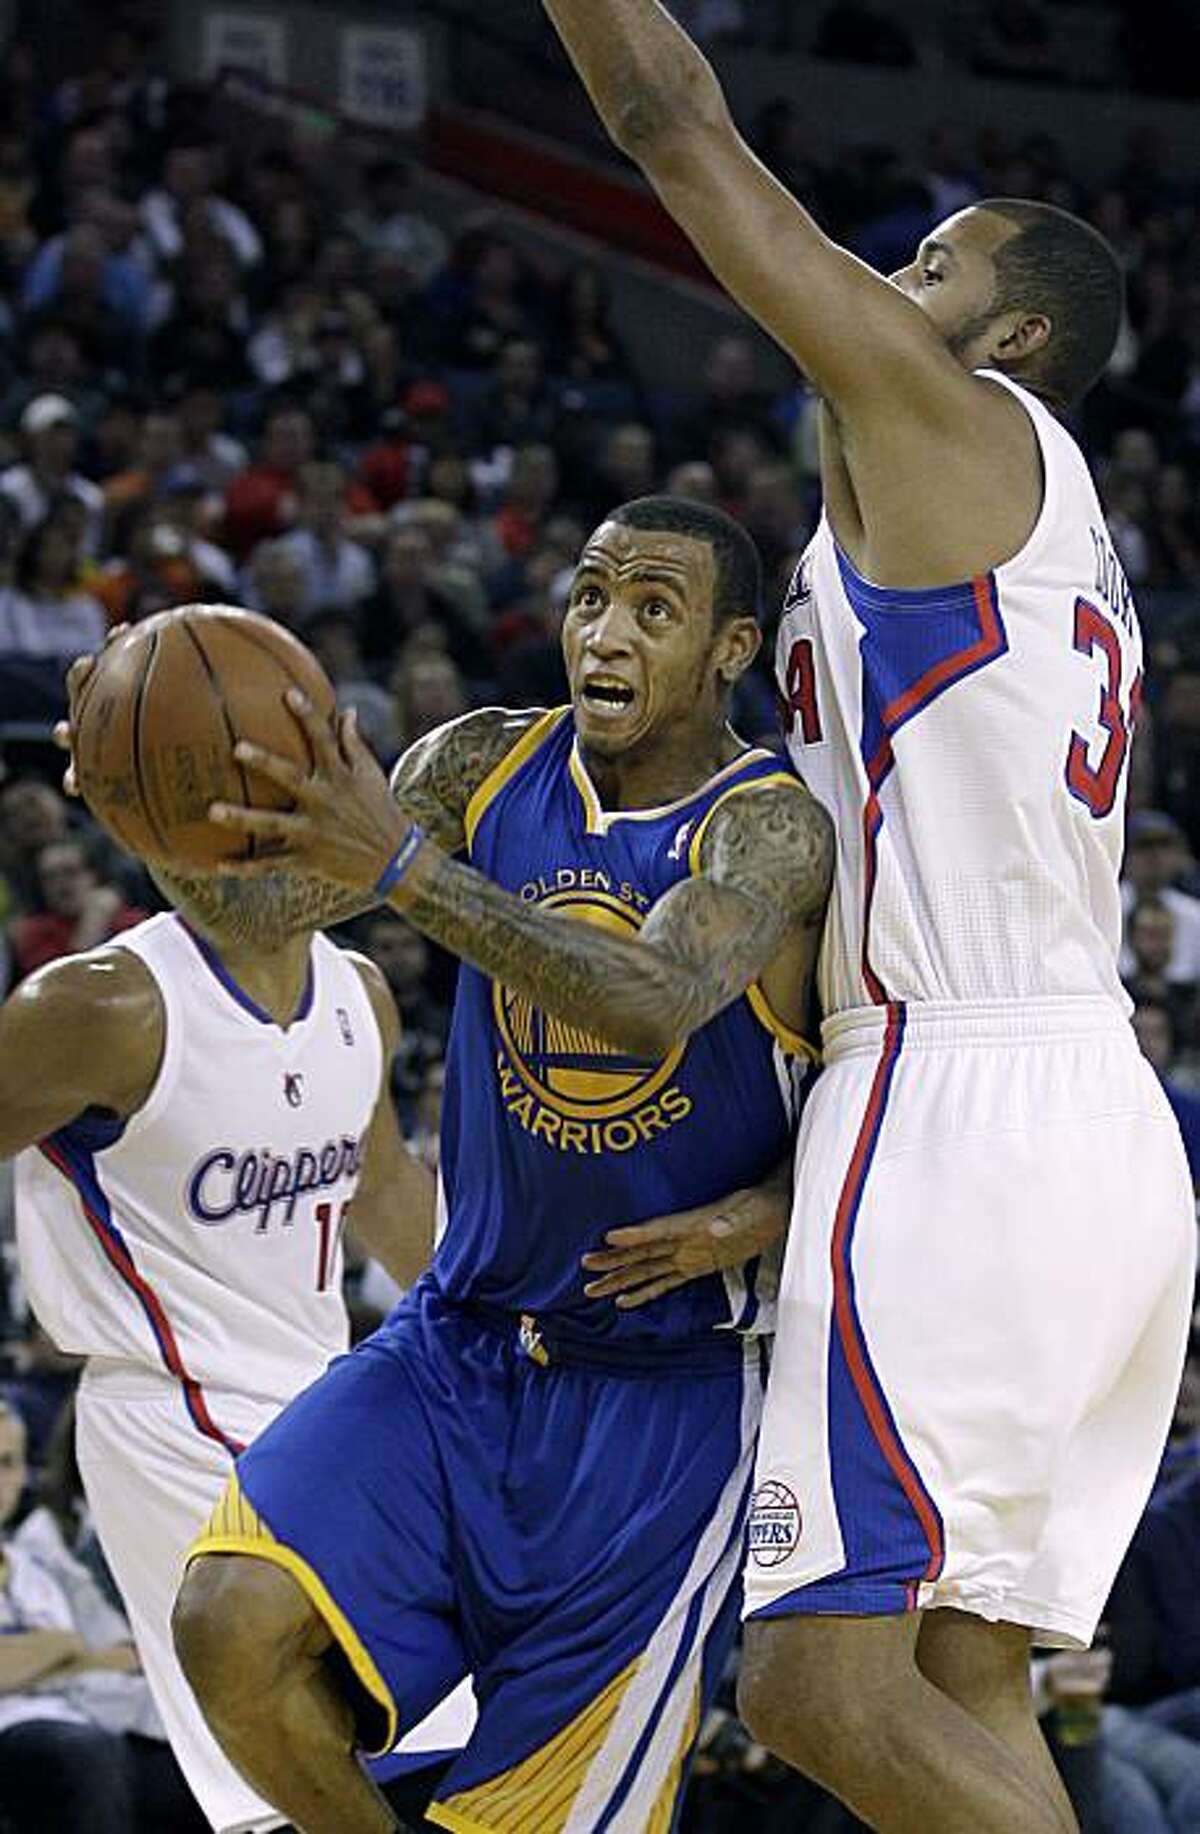 Golden State Warriors shooting guard Monta Ellis (8) drives past Los Angeles Clippers power forward Brian Cook (34) in the third quarter of an NBA basketball game in Oakland, Calif., Friday, Oct. 29, 2010.